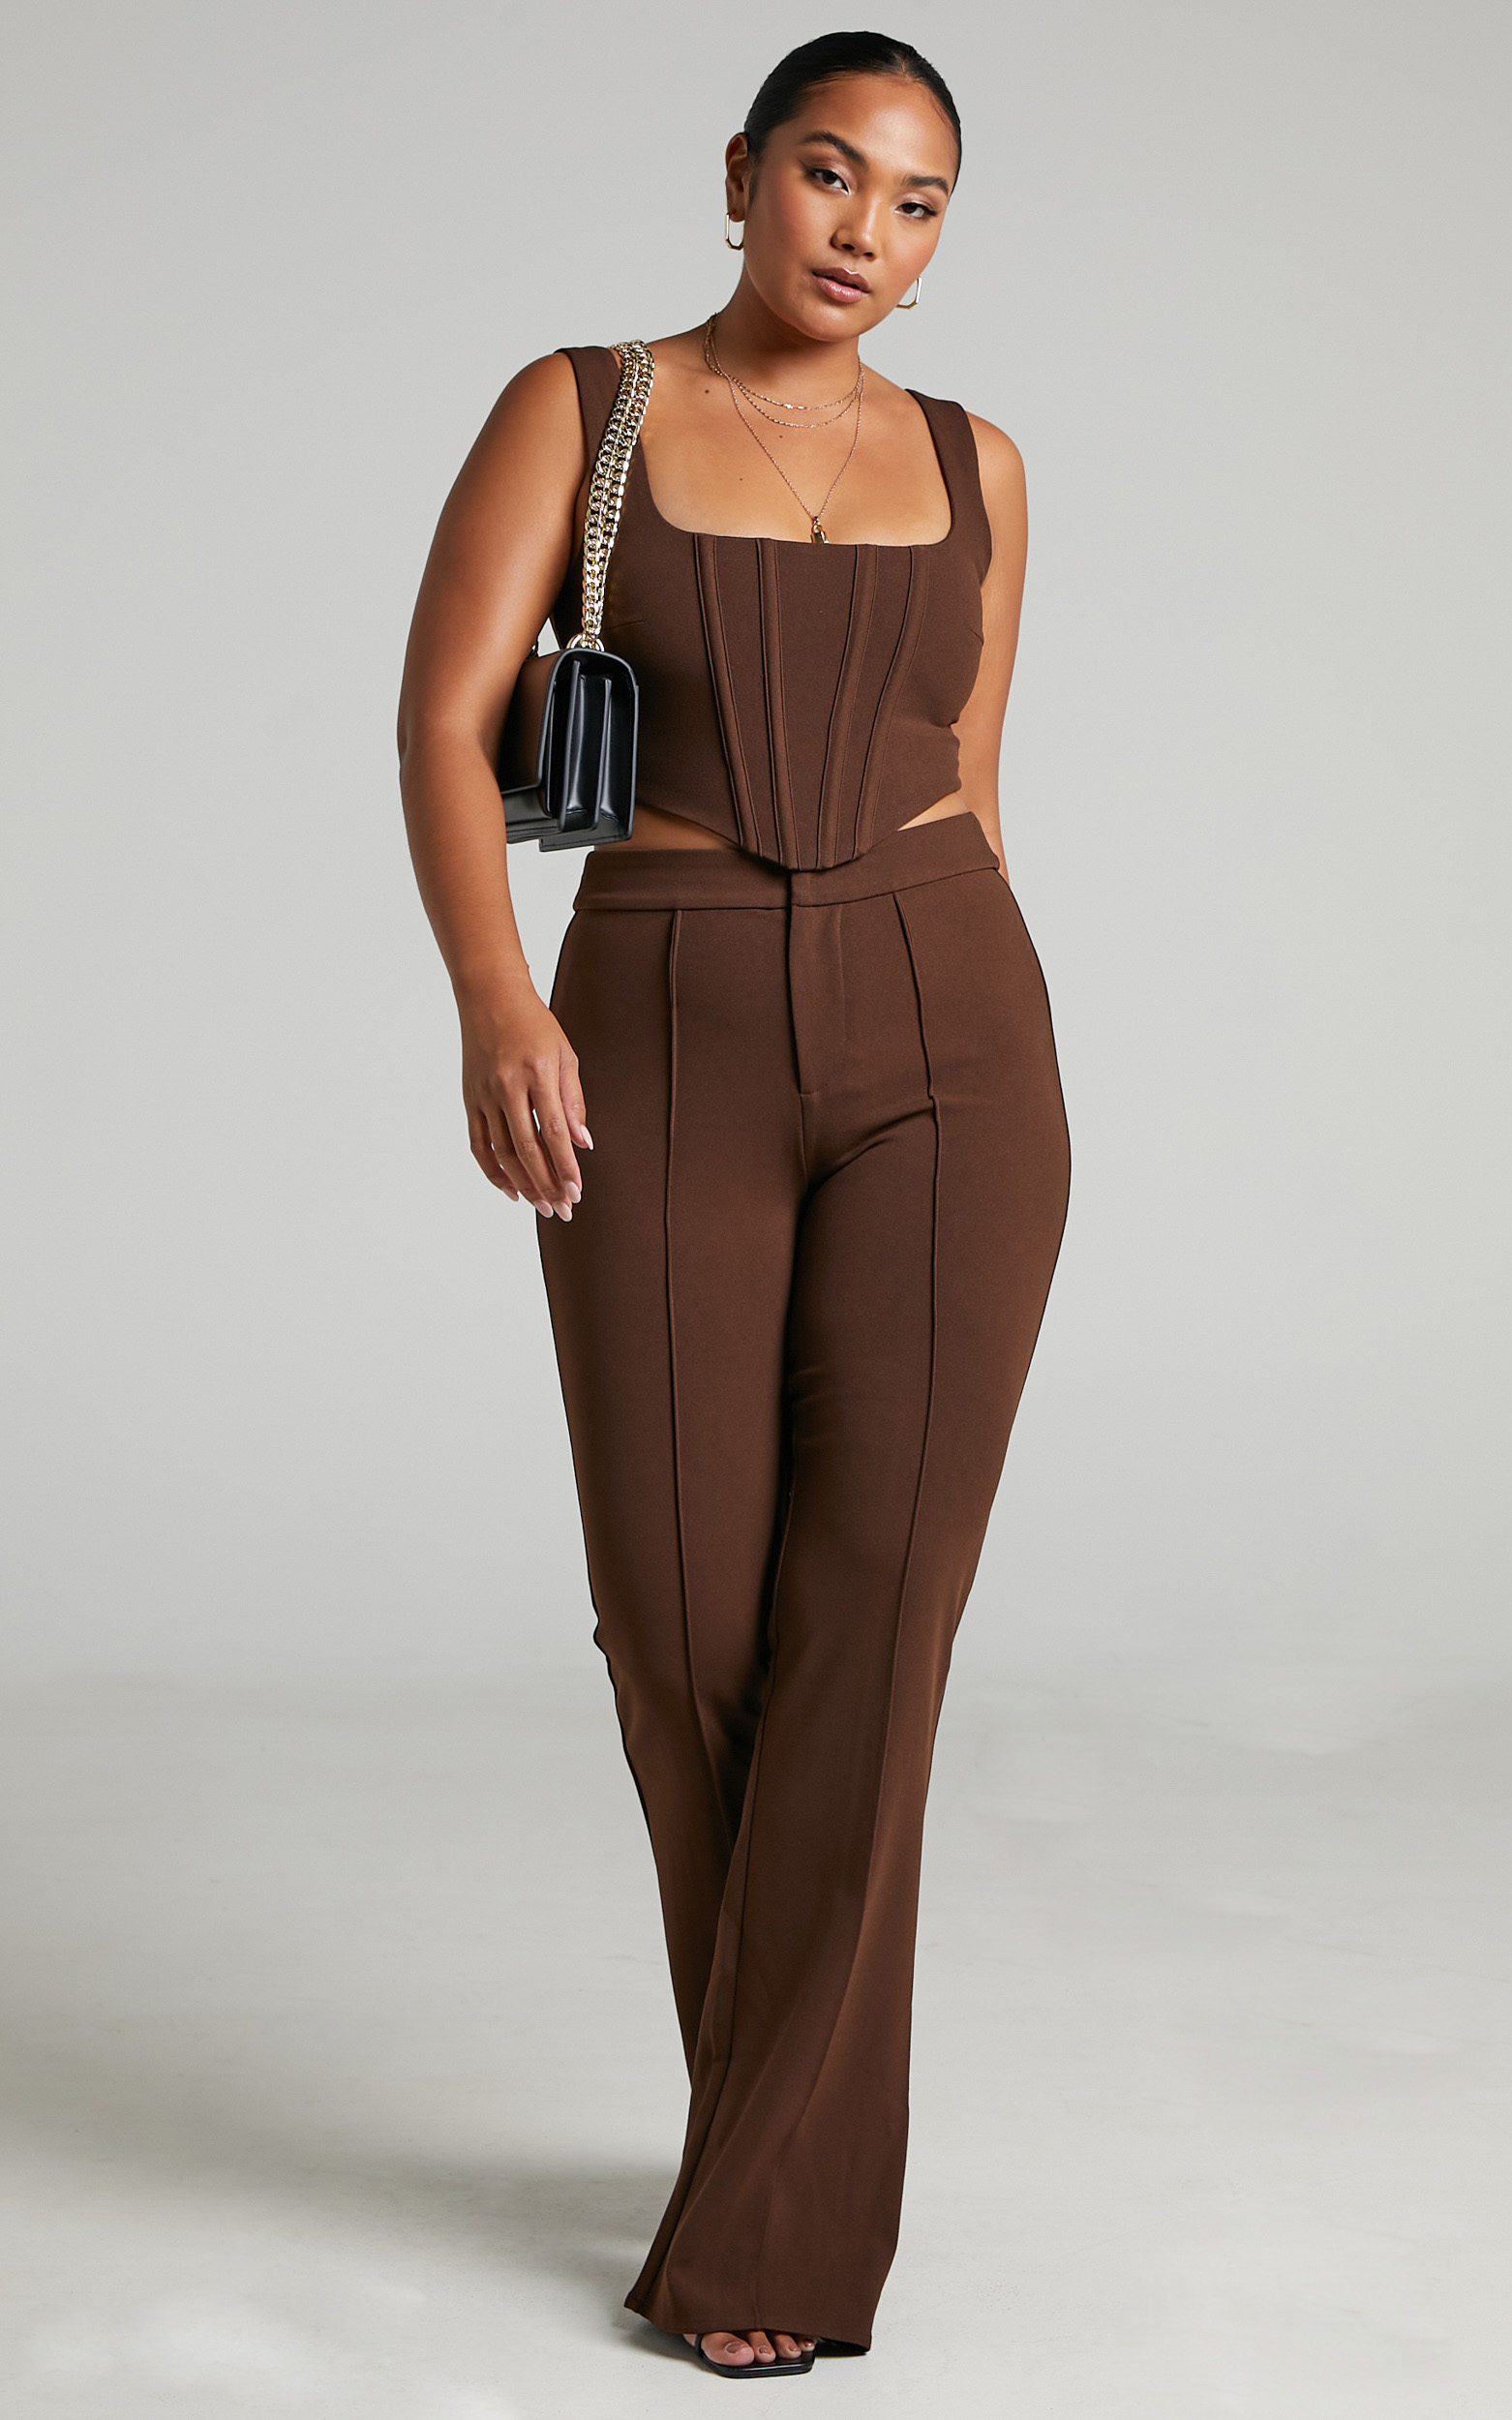 Ritta Corset Top and Pants Two Piece Set in Chocolate - 06, BRN1, hi-res image number null